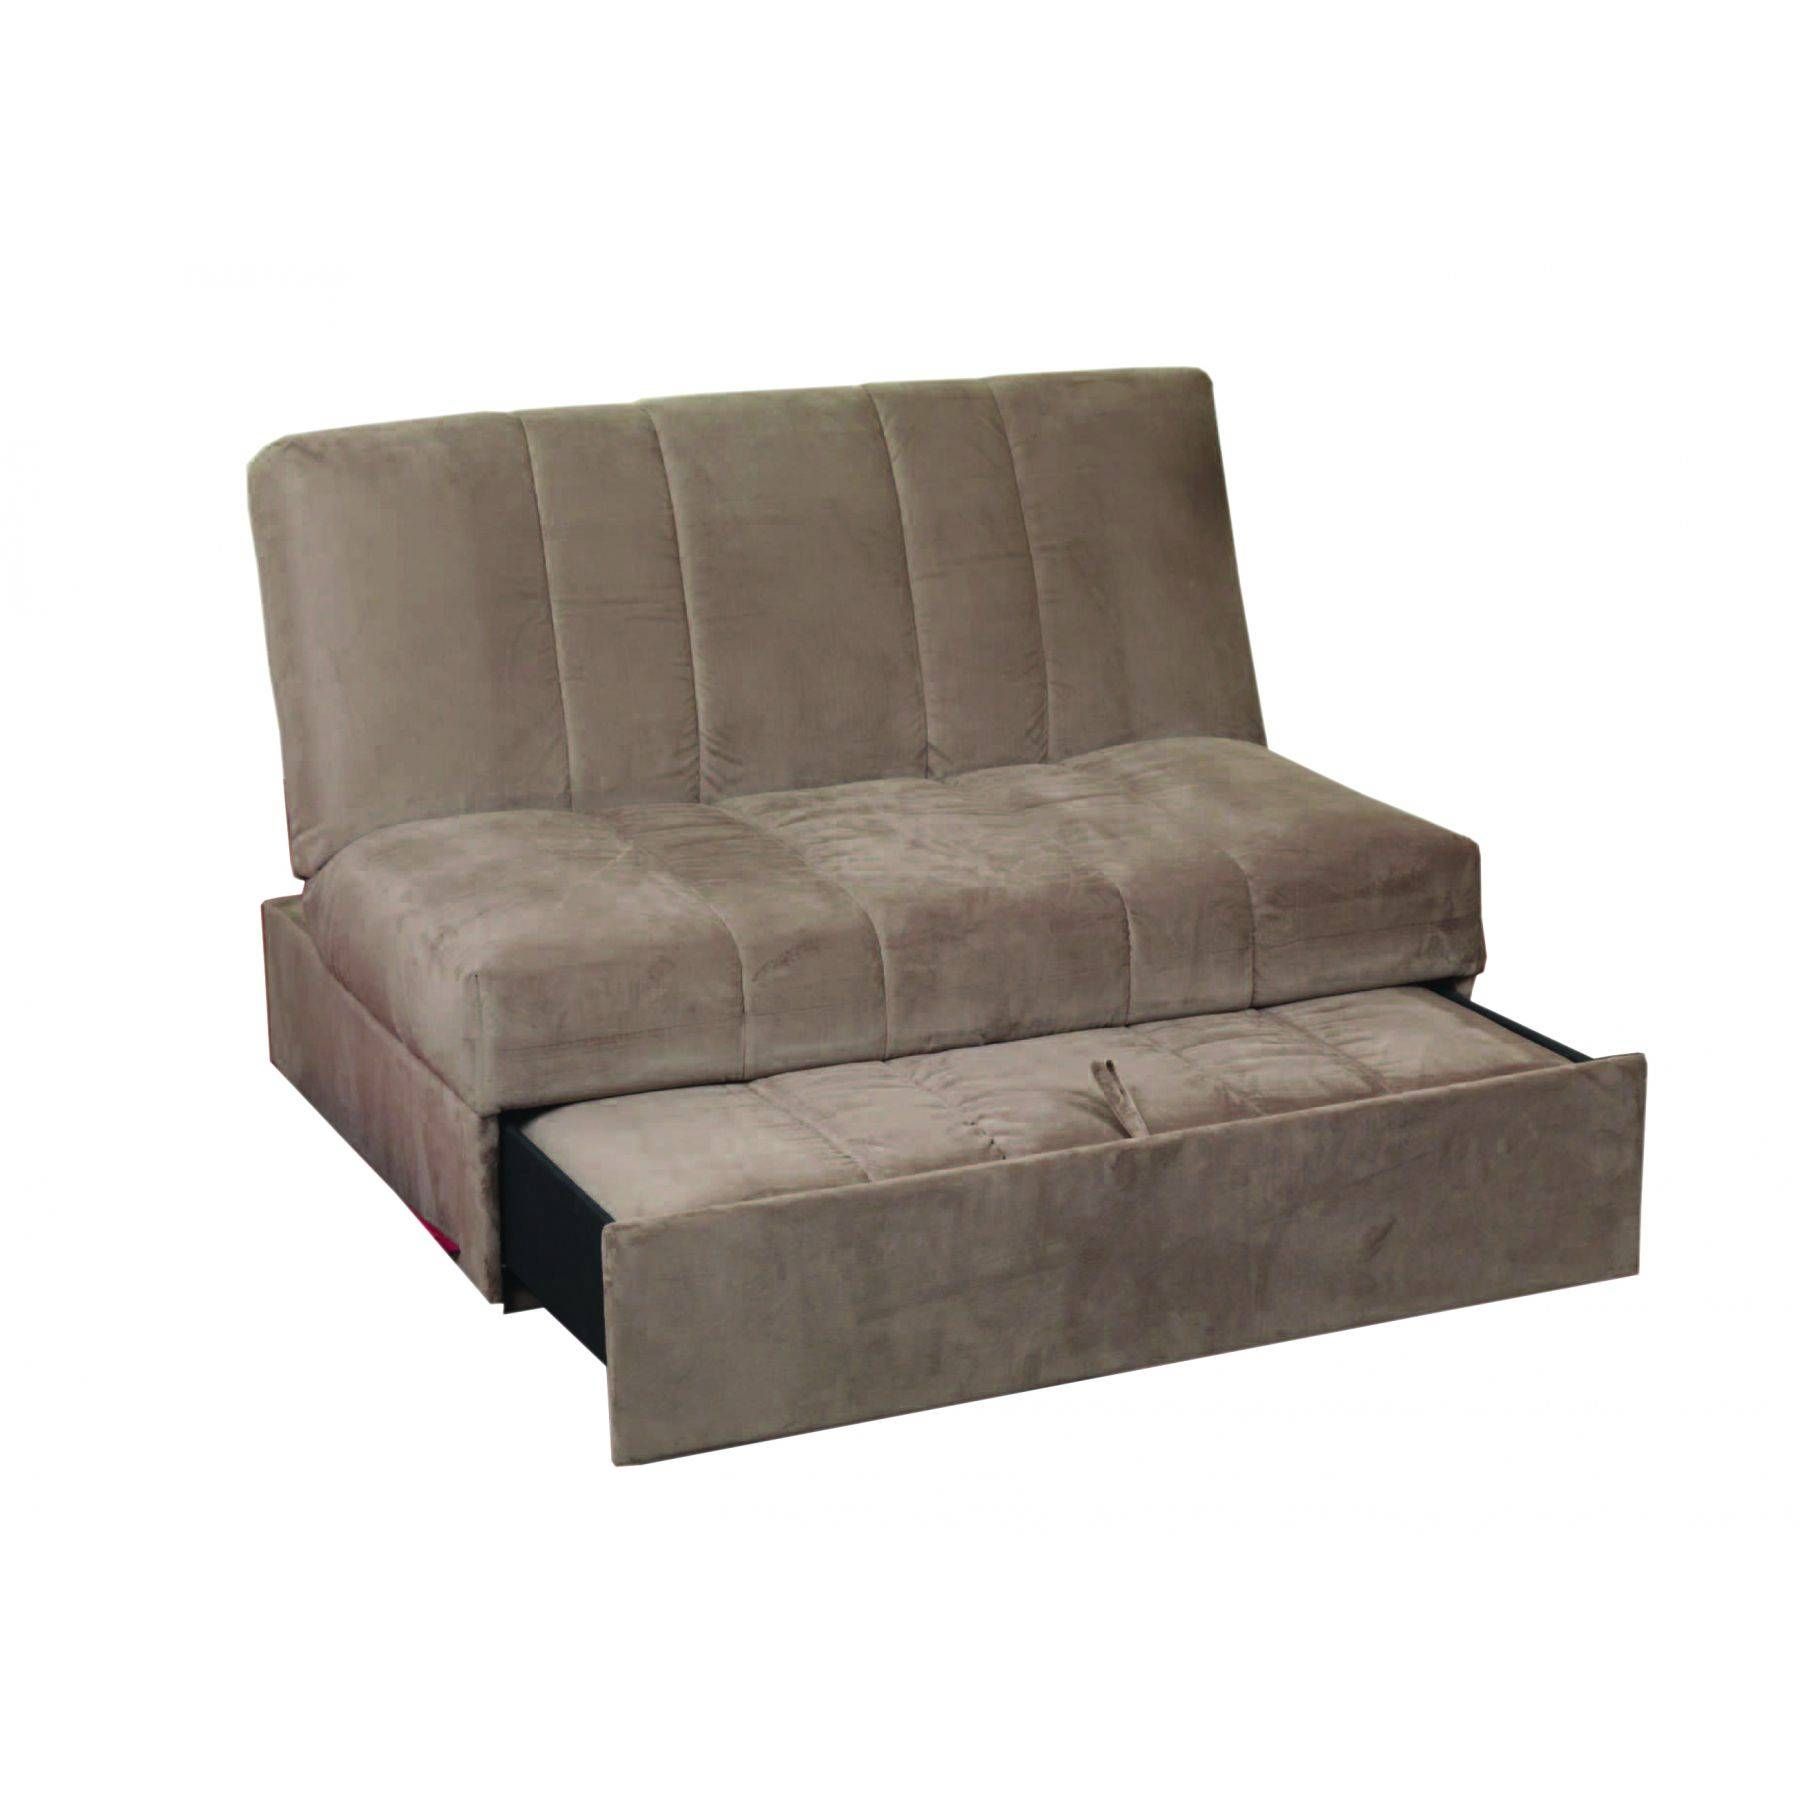 Sofas Center : Exceptional Rv Sofar Image Ideas 68inch Sleepersofa For 68 Inch Sofas (View 14 of 30)